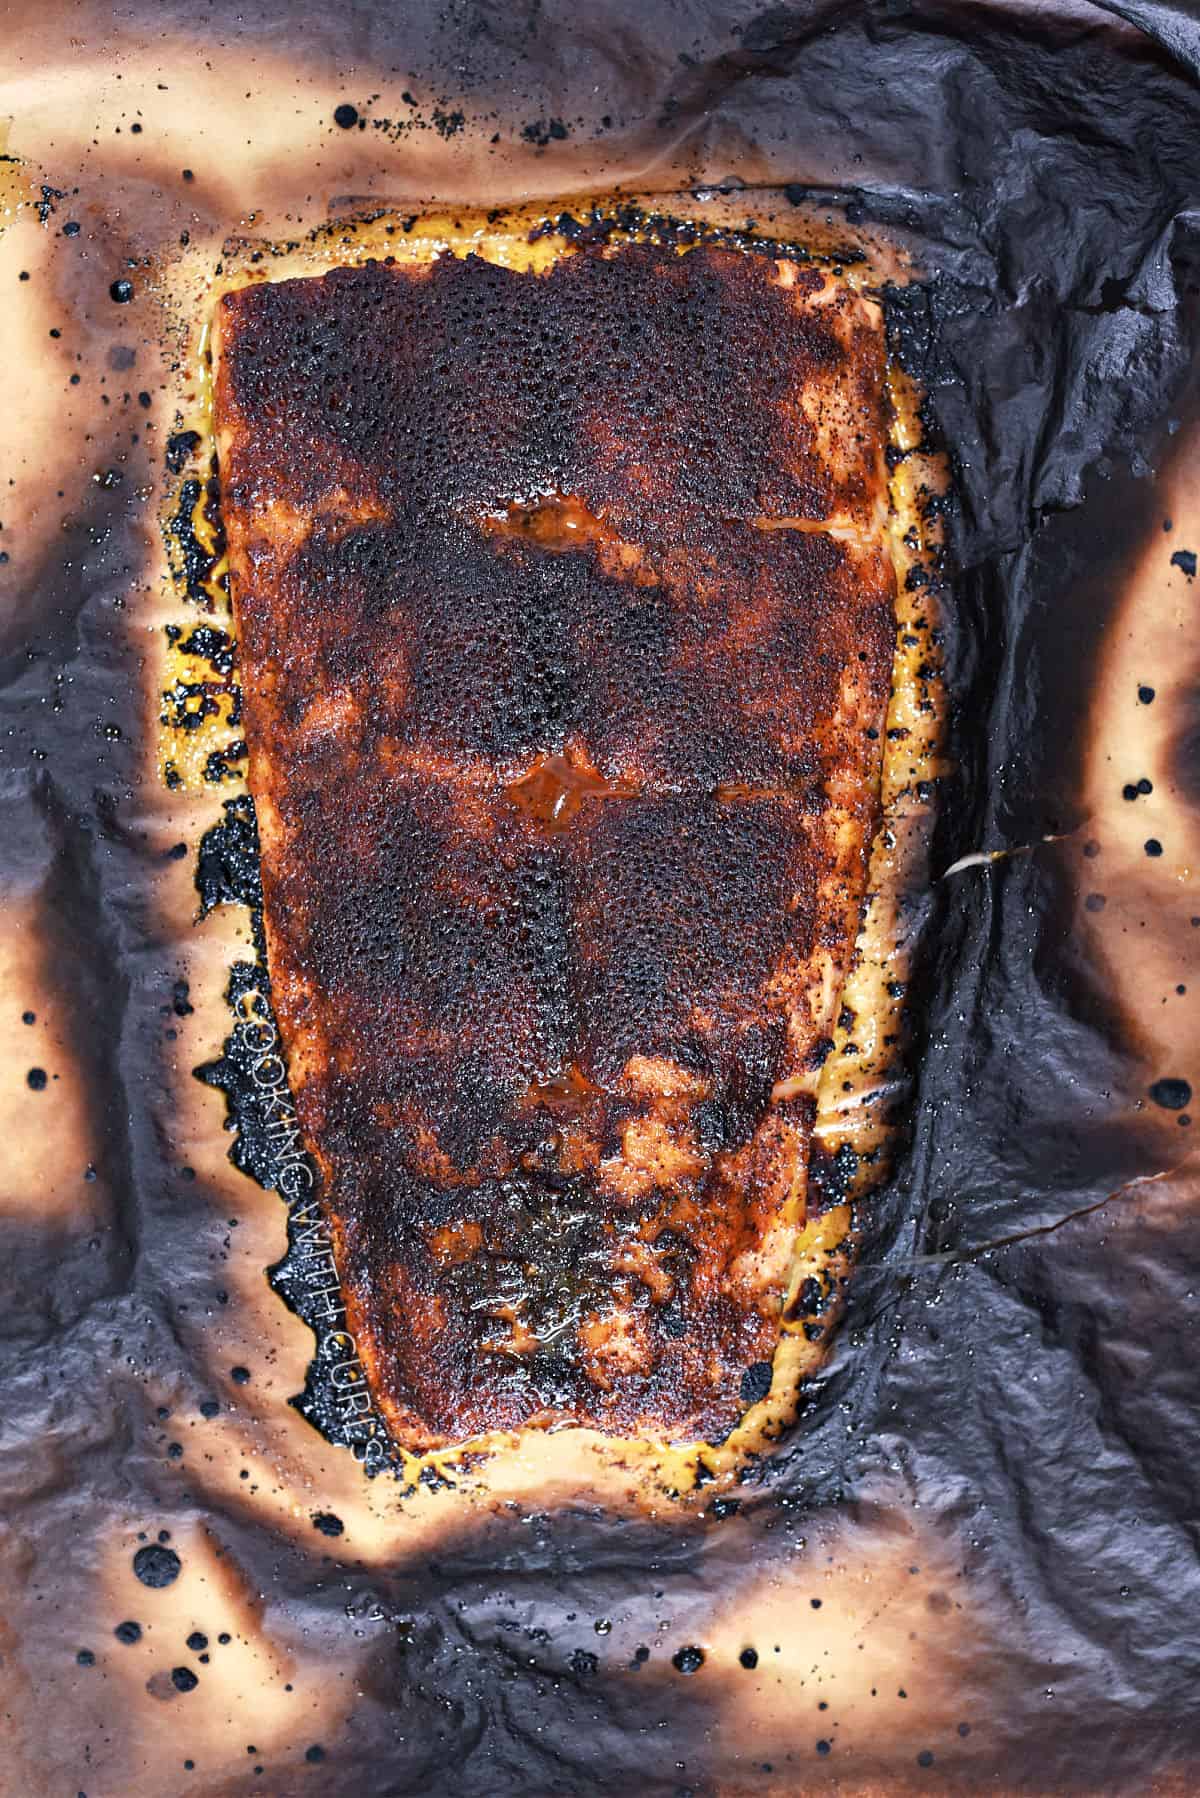 Broiled spice rubbed salmon filet on burnt parchment paper. 